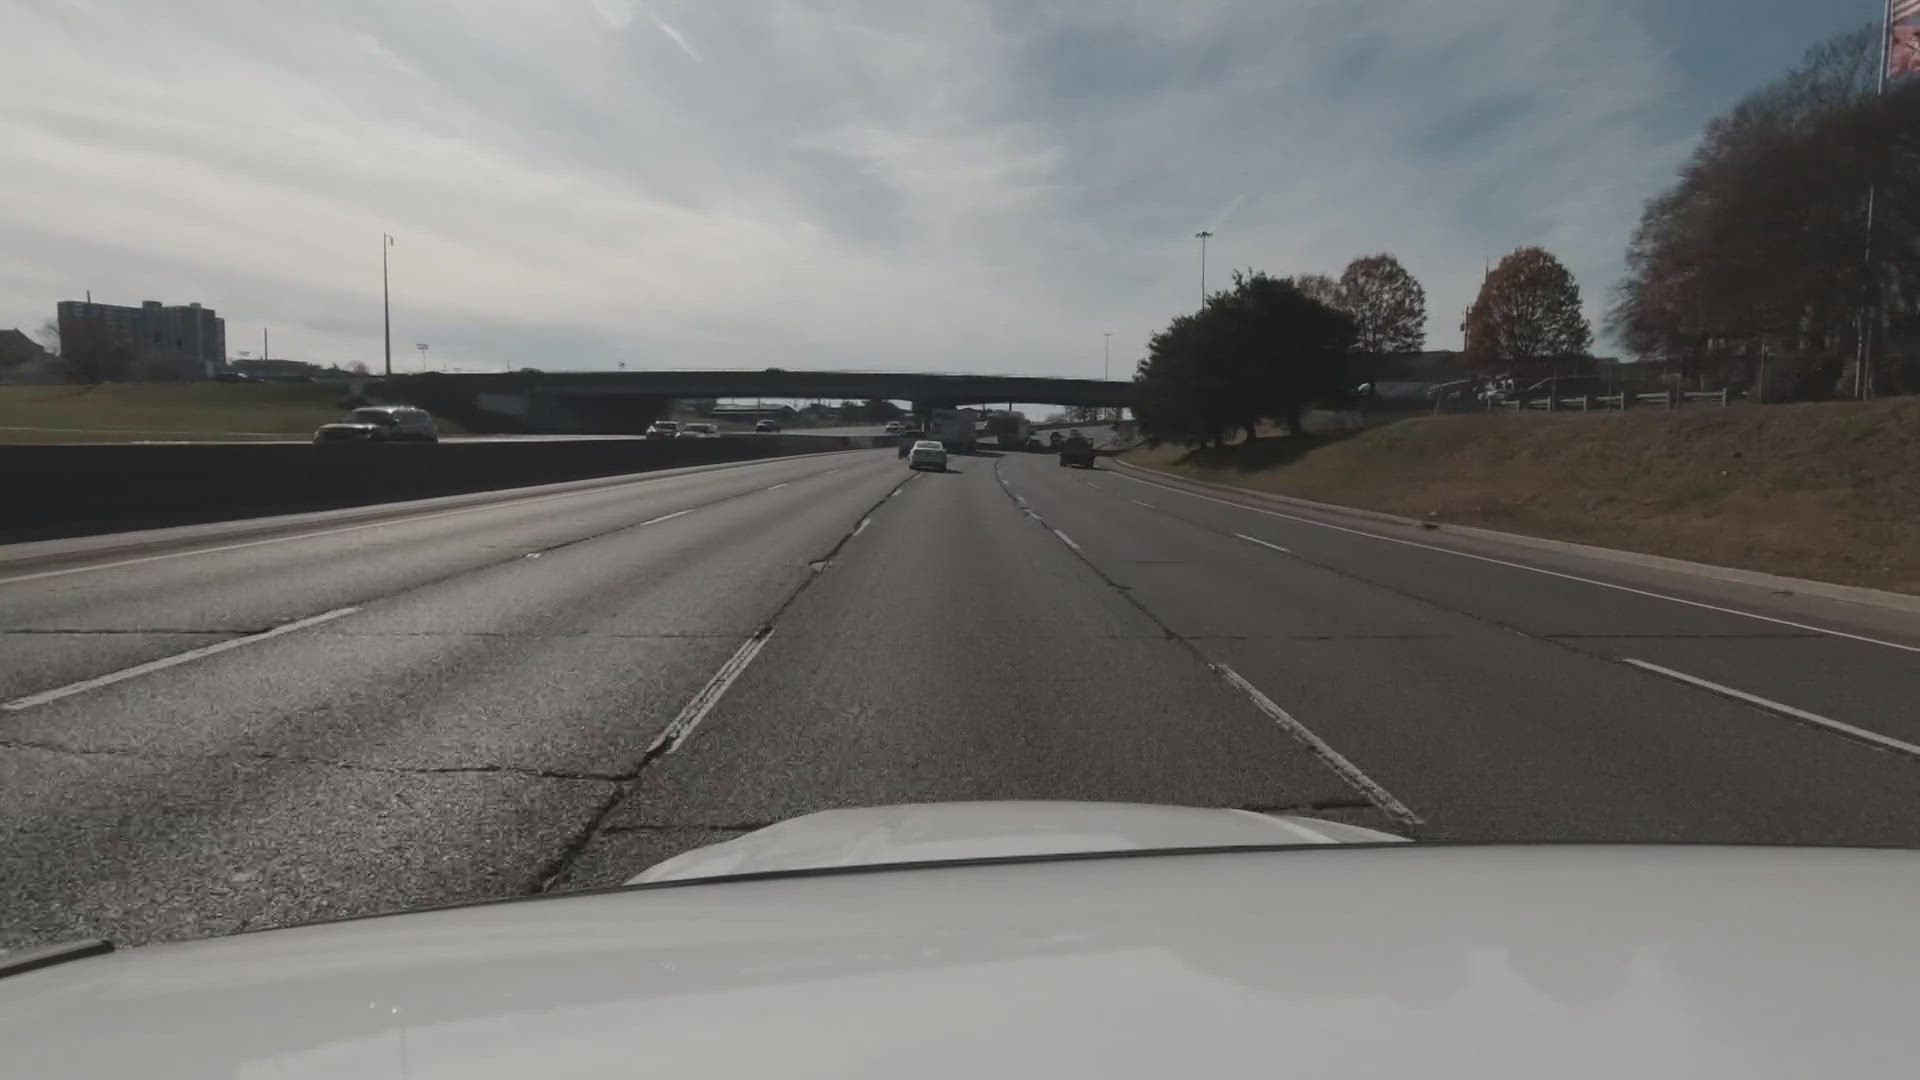 According to Knoxville Police, a Nissan SUV lost a tire when it crossed over the divider wall and struck another Nissan SUV going through the windshield.